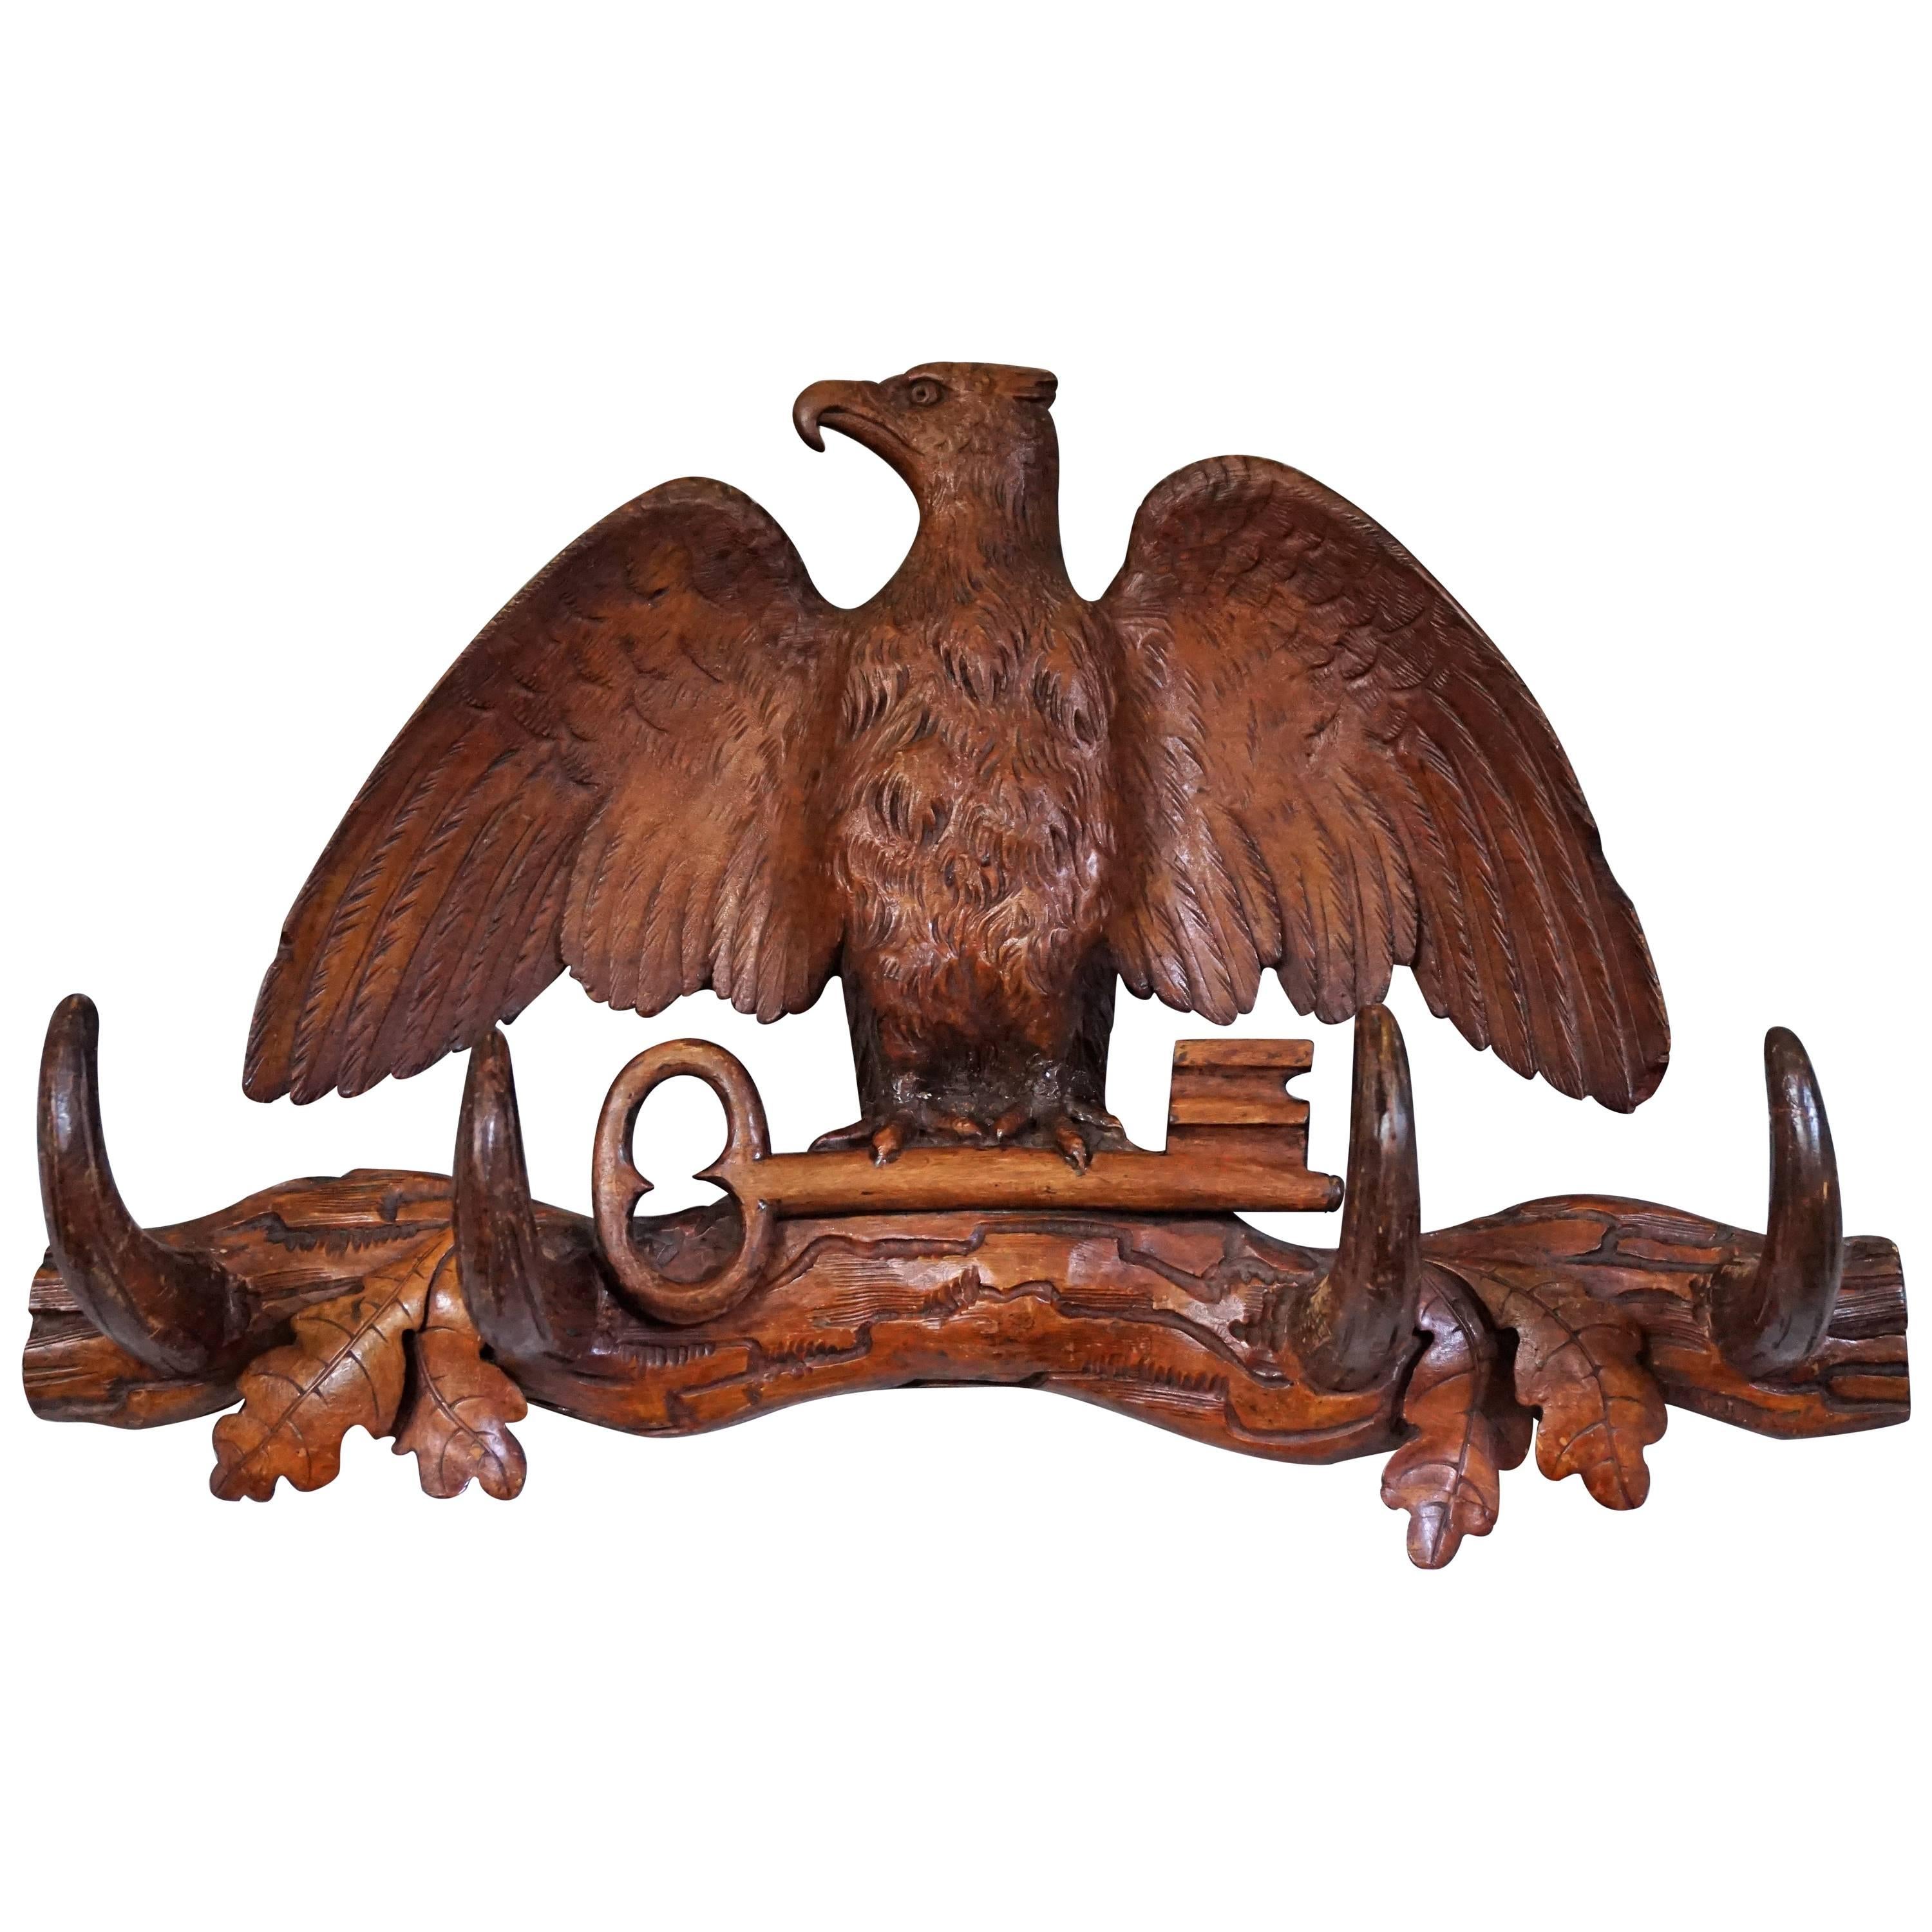 Antique Hand-Carved Small Black Forest Coat or Key Rack with Eagle Holding a Key